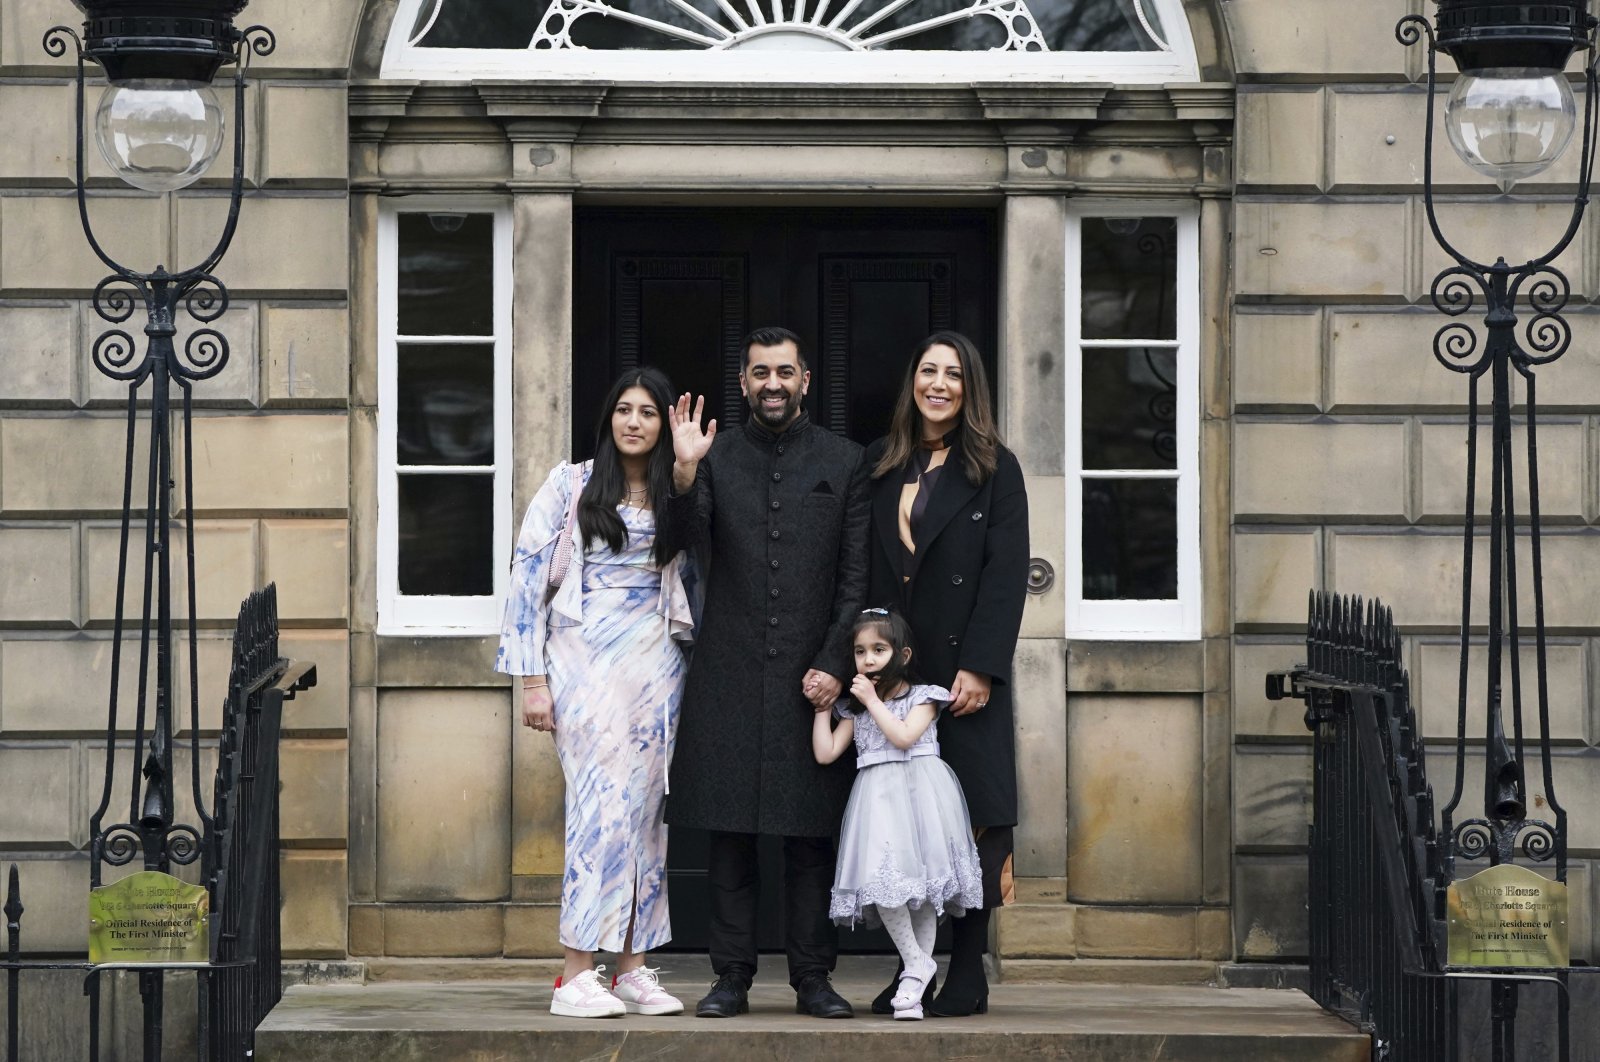 Humza Yousaf (C) with his wife Nadia el-Nakla, daughter Amal, 3, and step-daughter Maya (L) pose for a photo, at Bute House, Edinburgh, Scotland, March 29, 2023. (AP Photo)